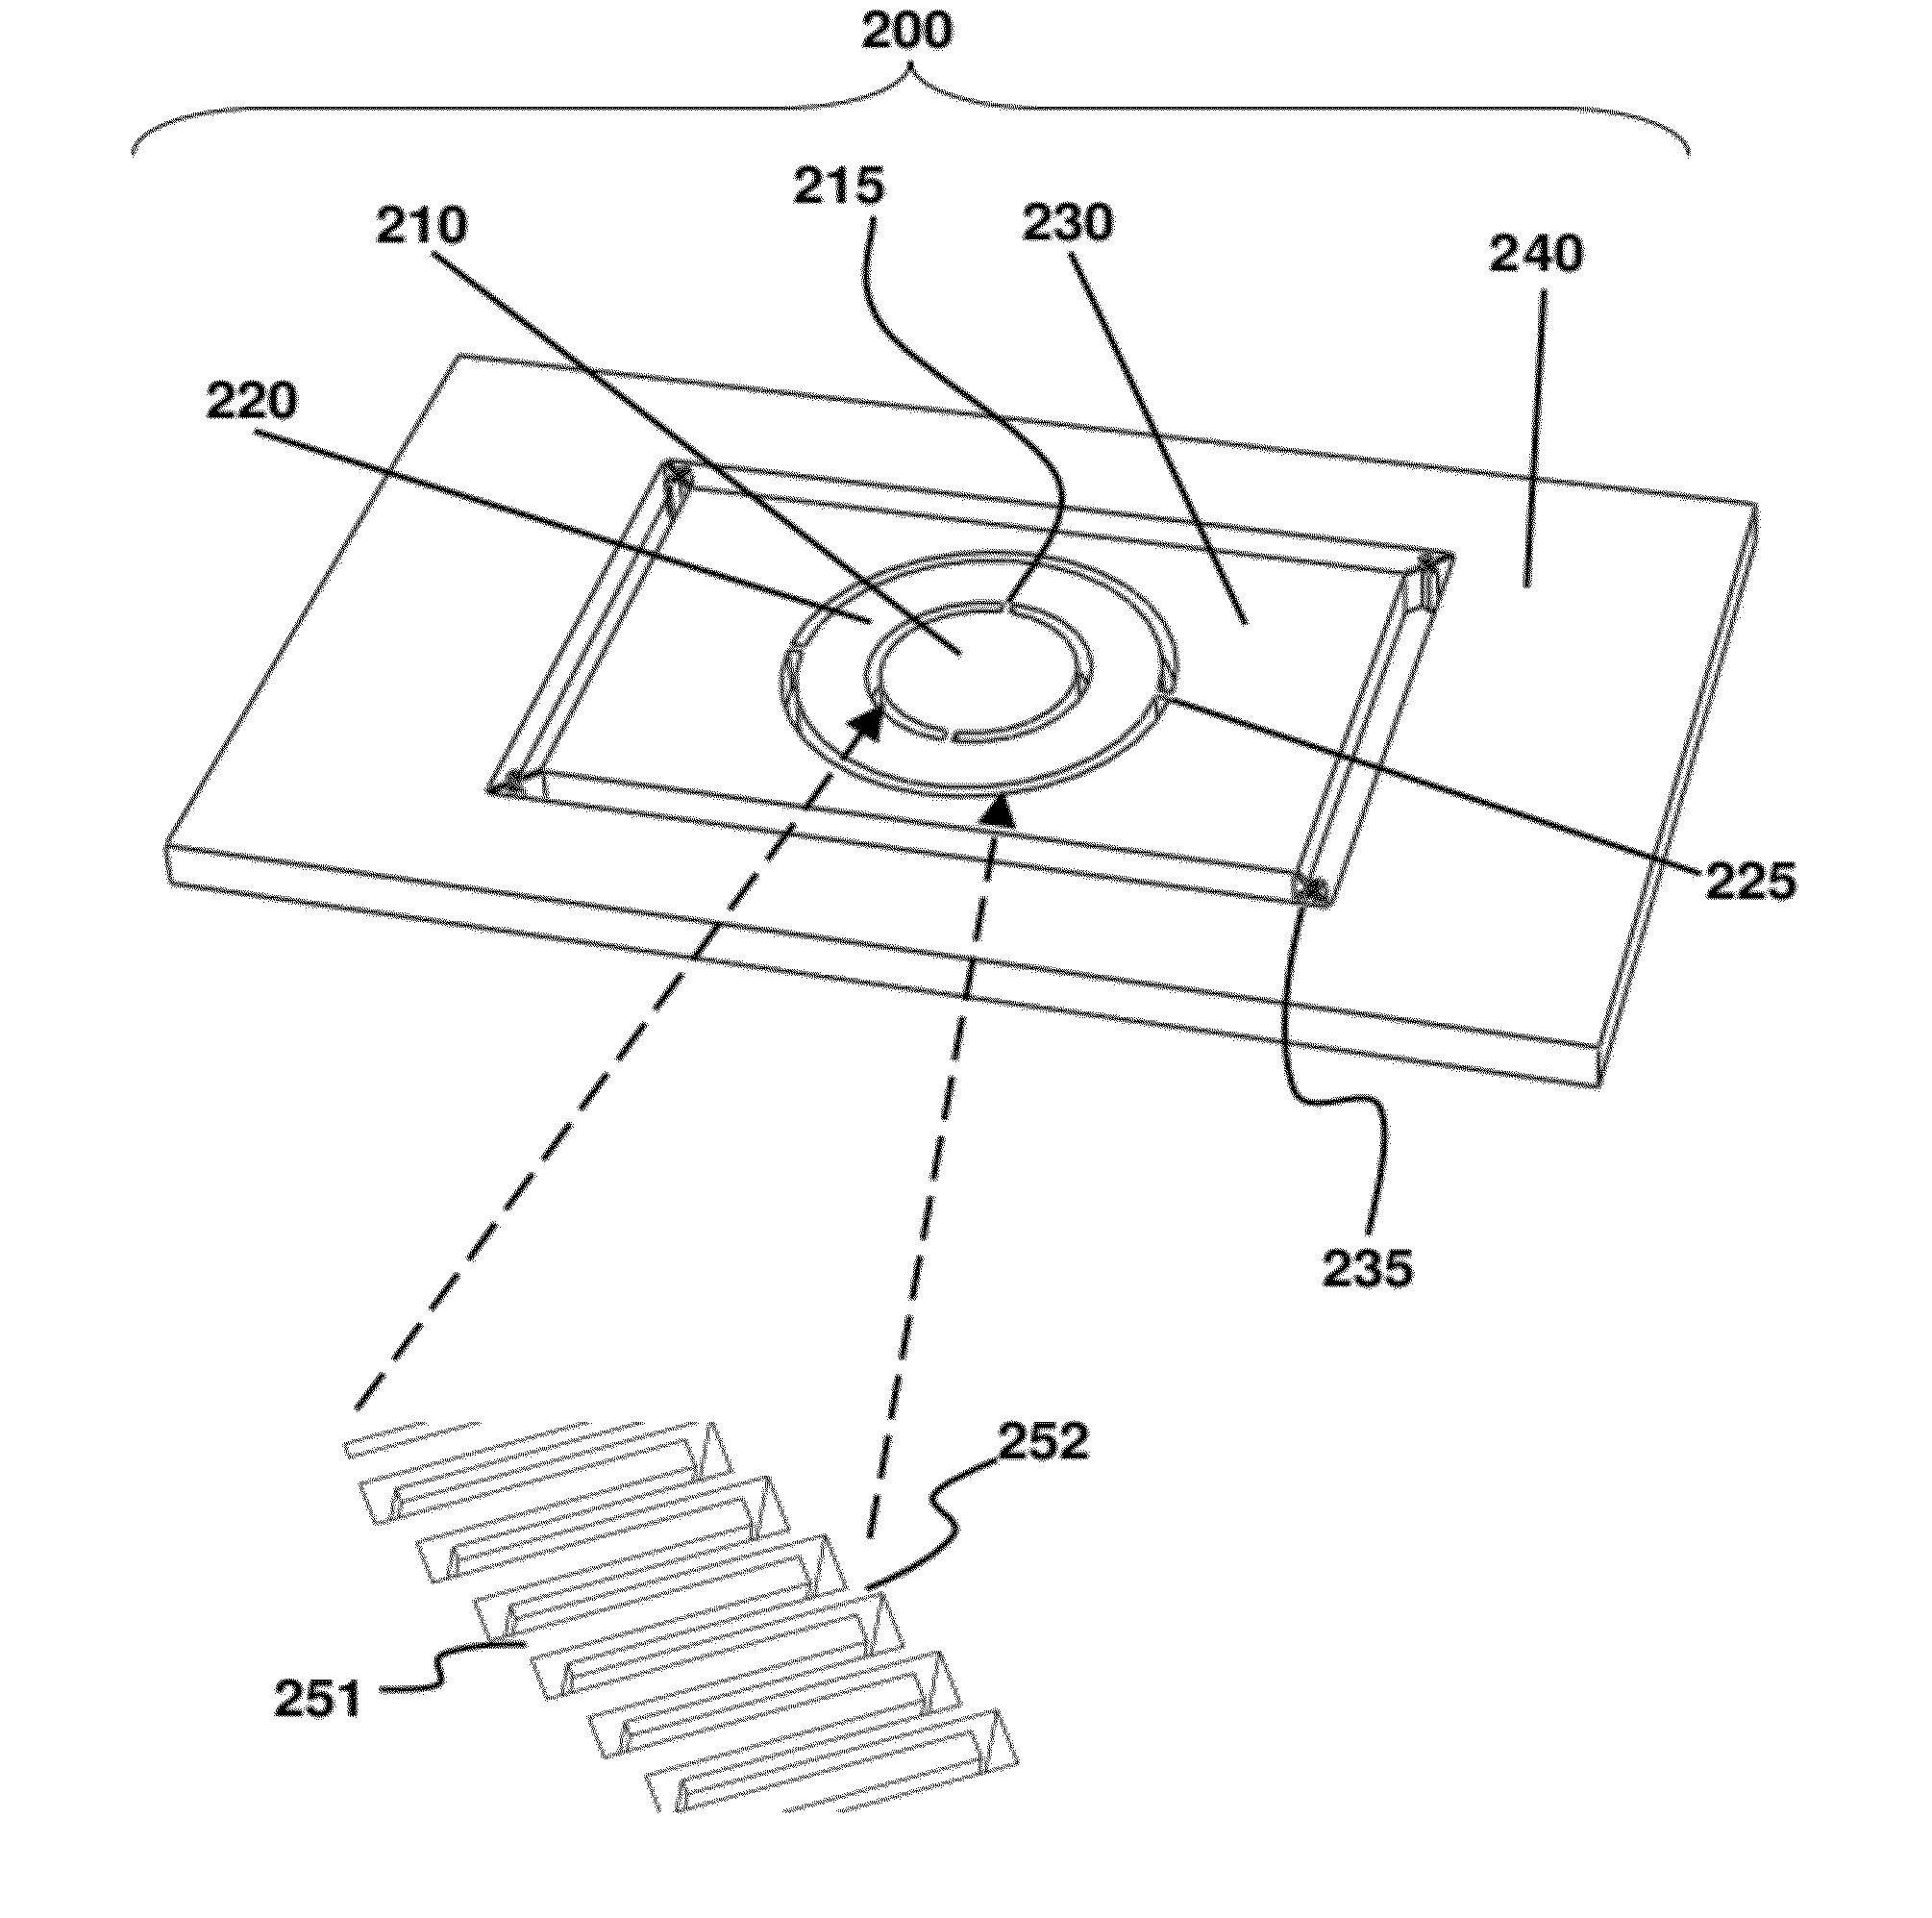 Device for reducing speckle effect in a display system